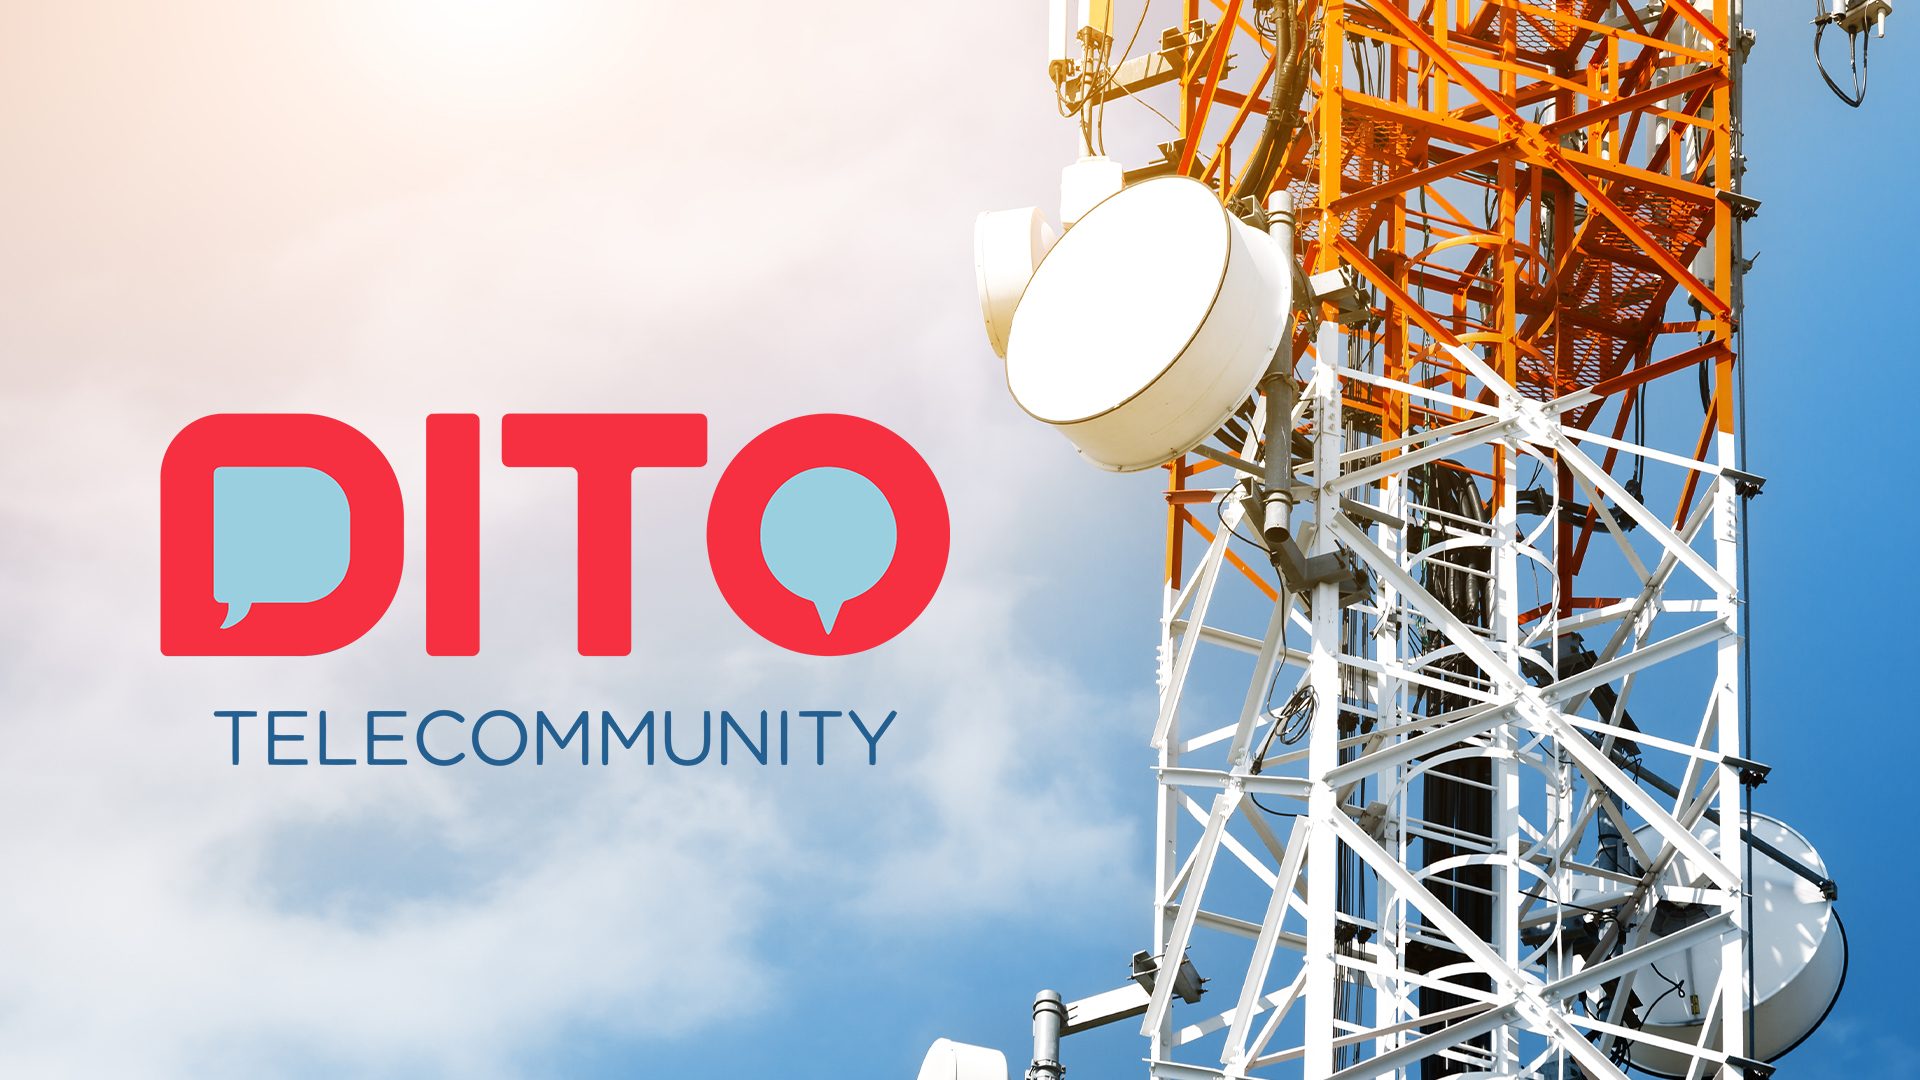 Dito to launch 5G home broadband service in 2021